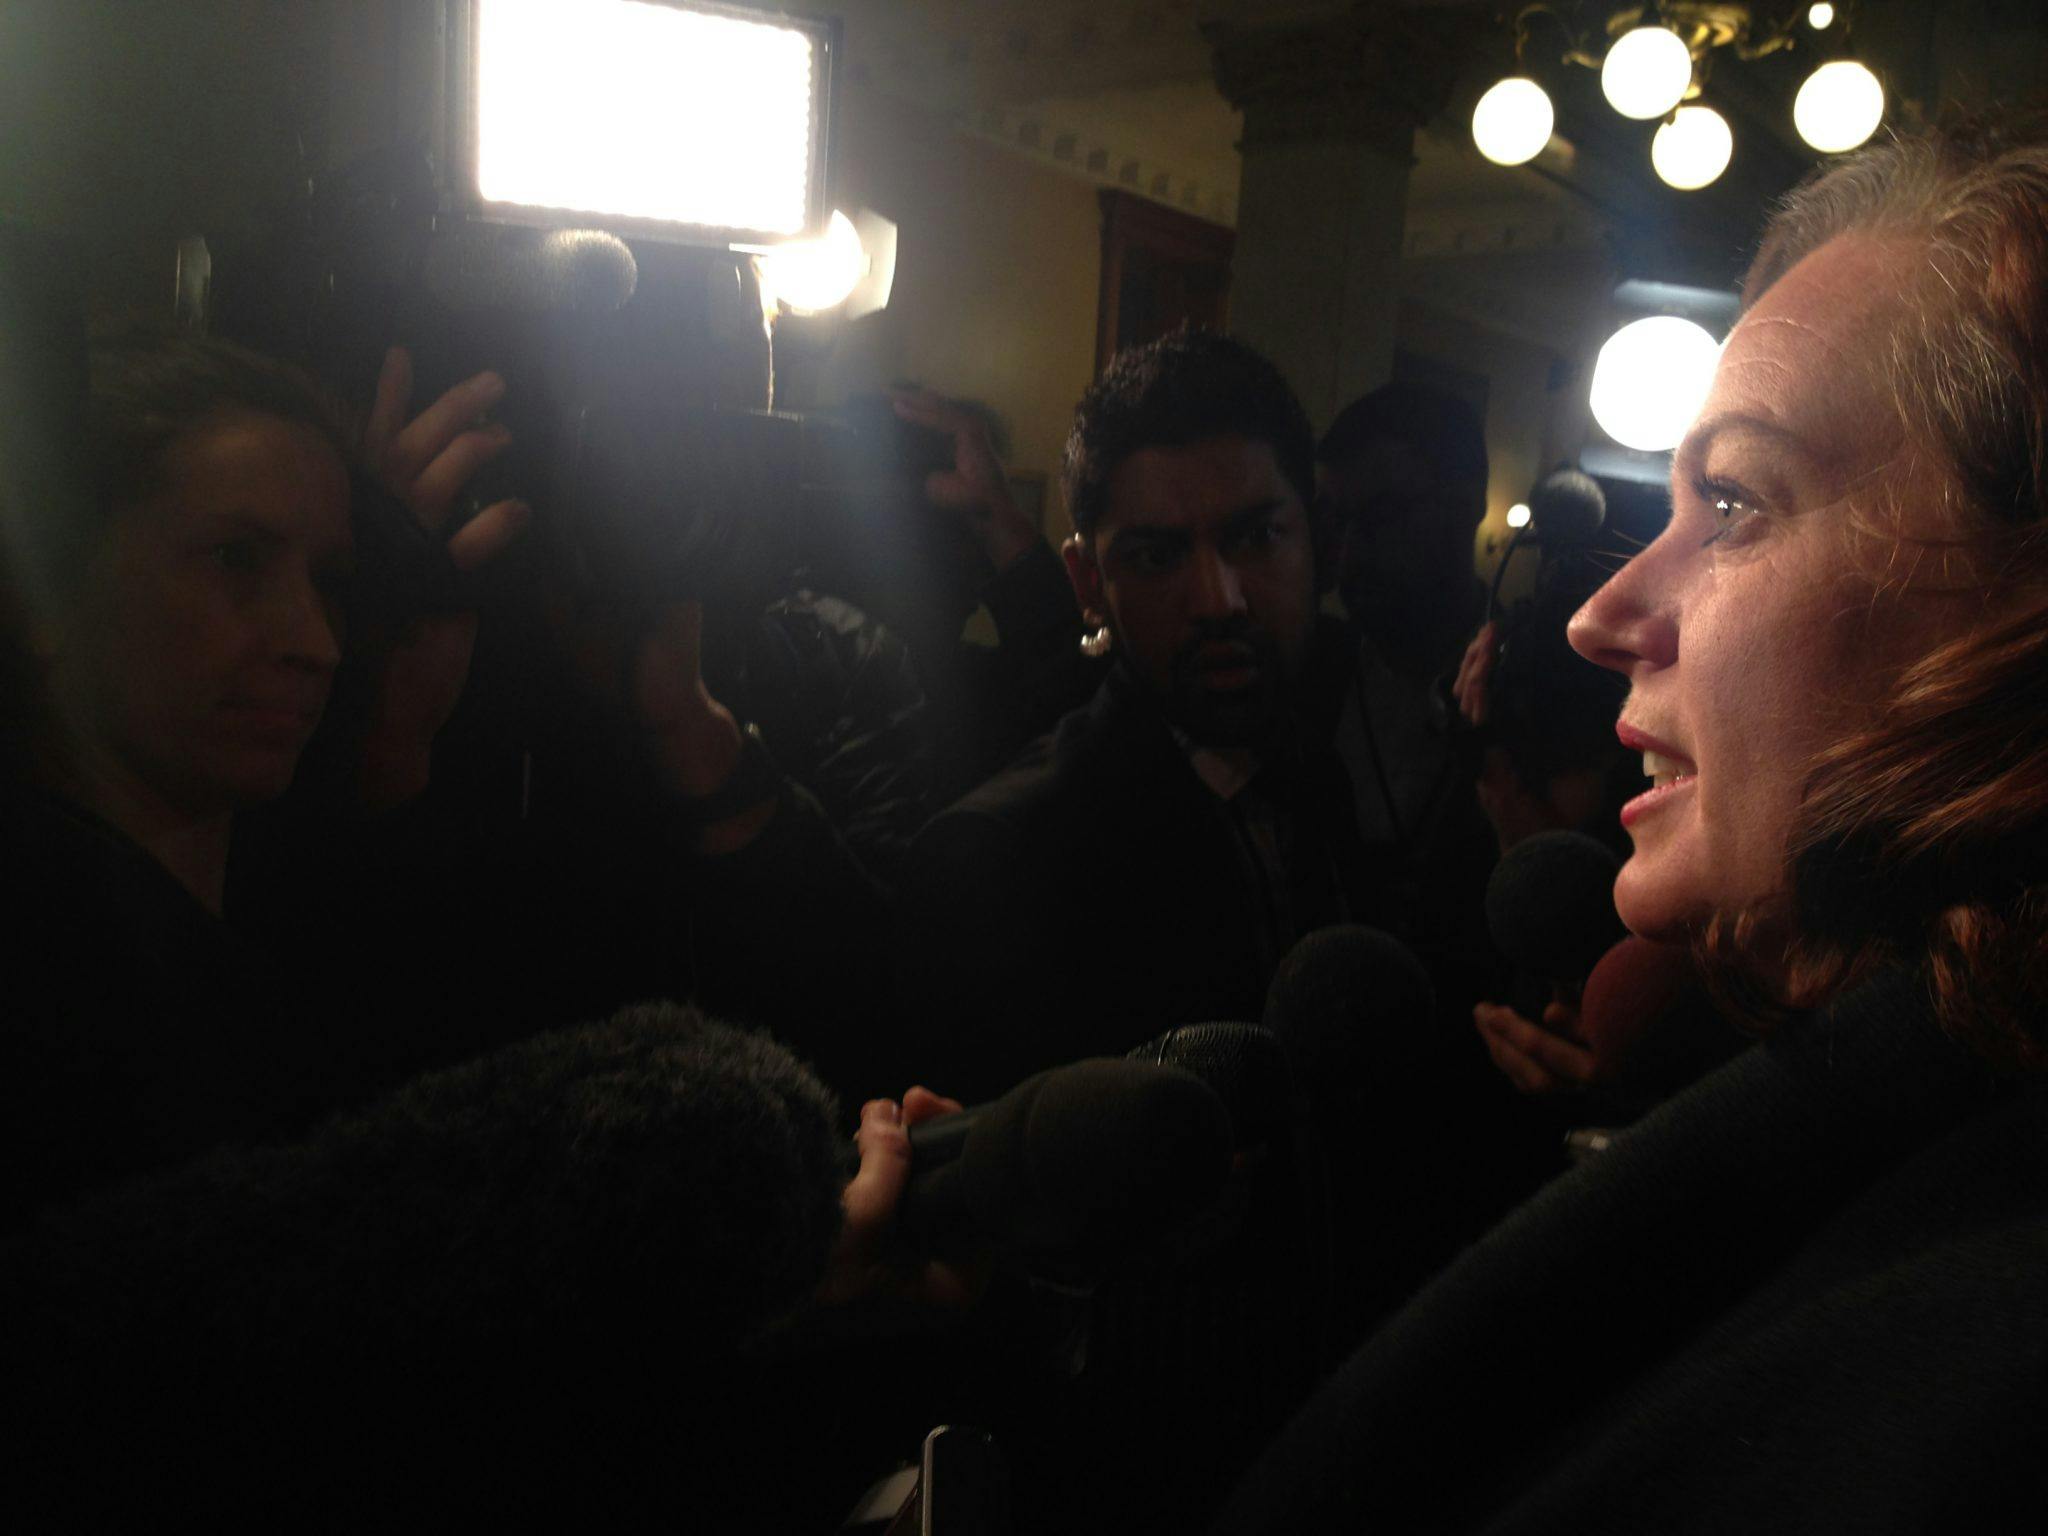 Lisa MacLeod: I reported allegations I’d heard about Patrick Brown to the campaign before Christmas